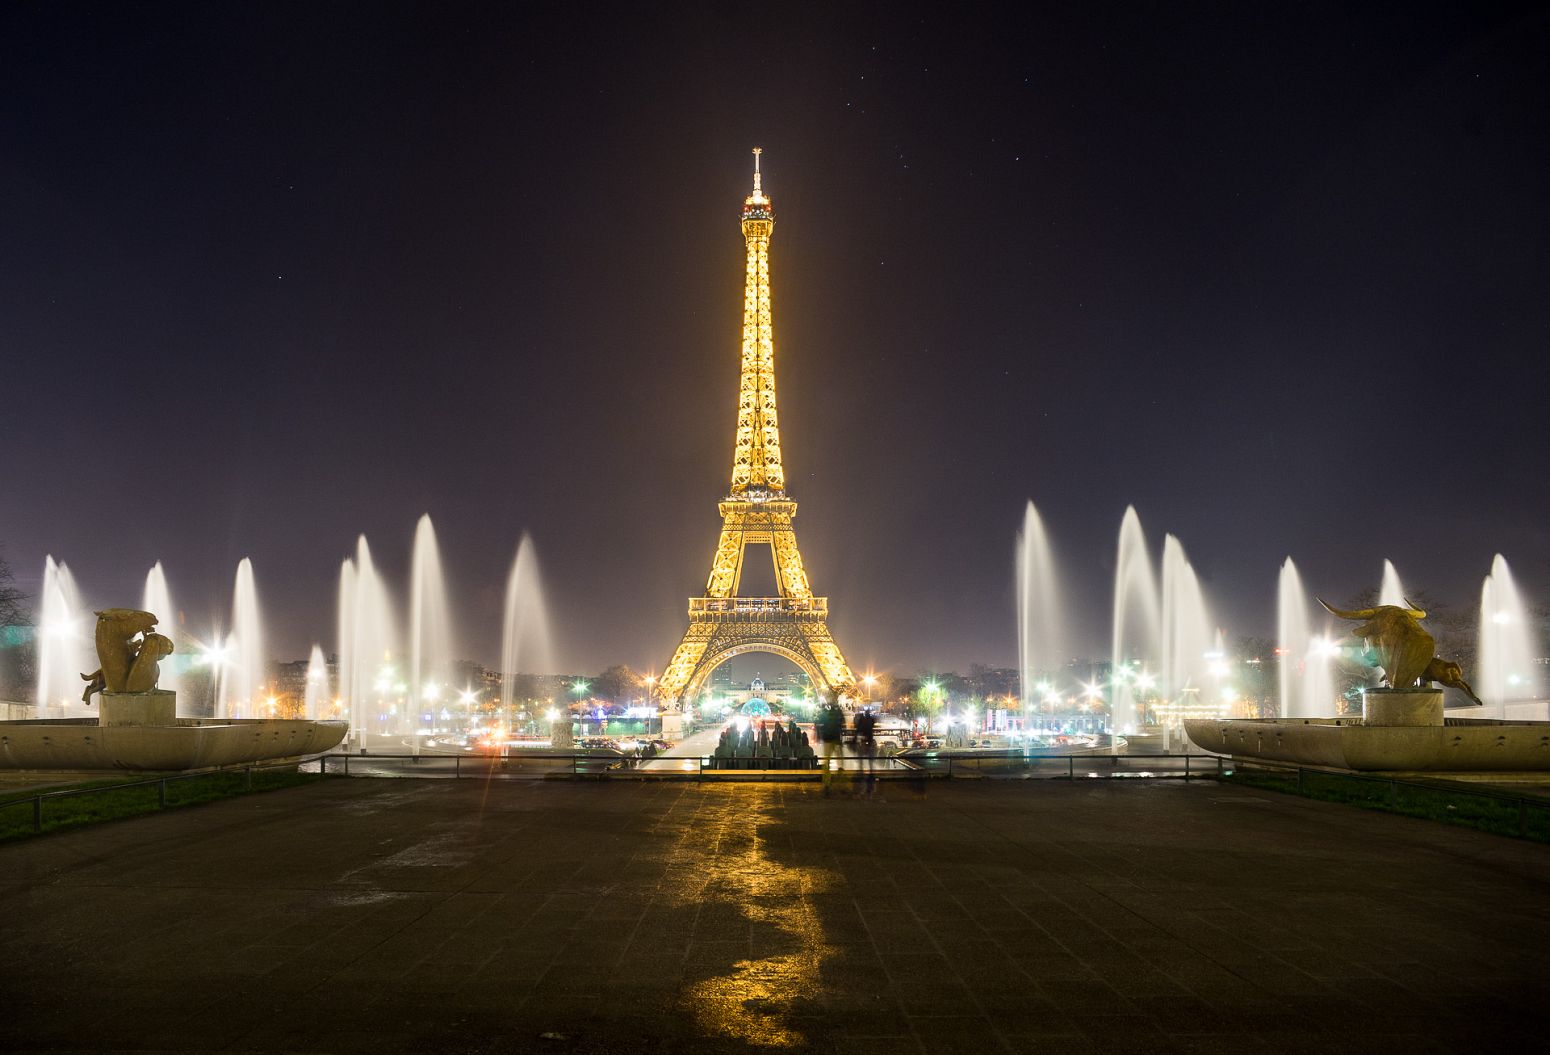 The Tour Eiffel from the Trocadero, Paris, France